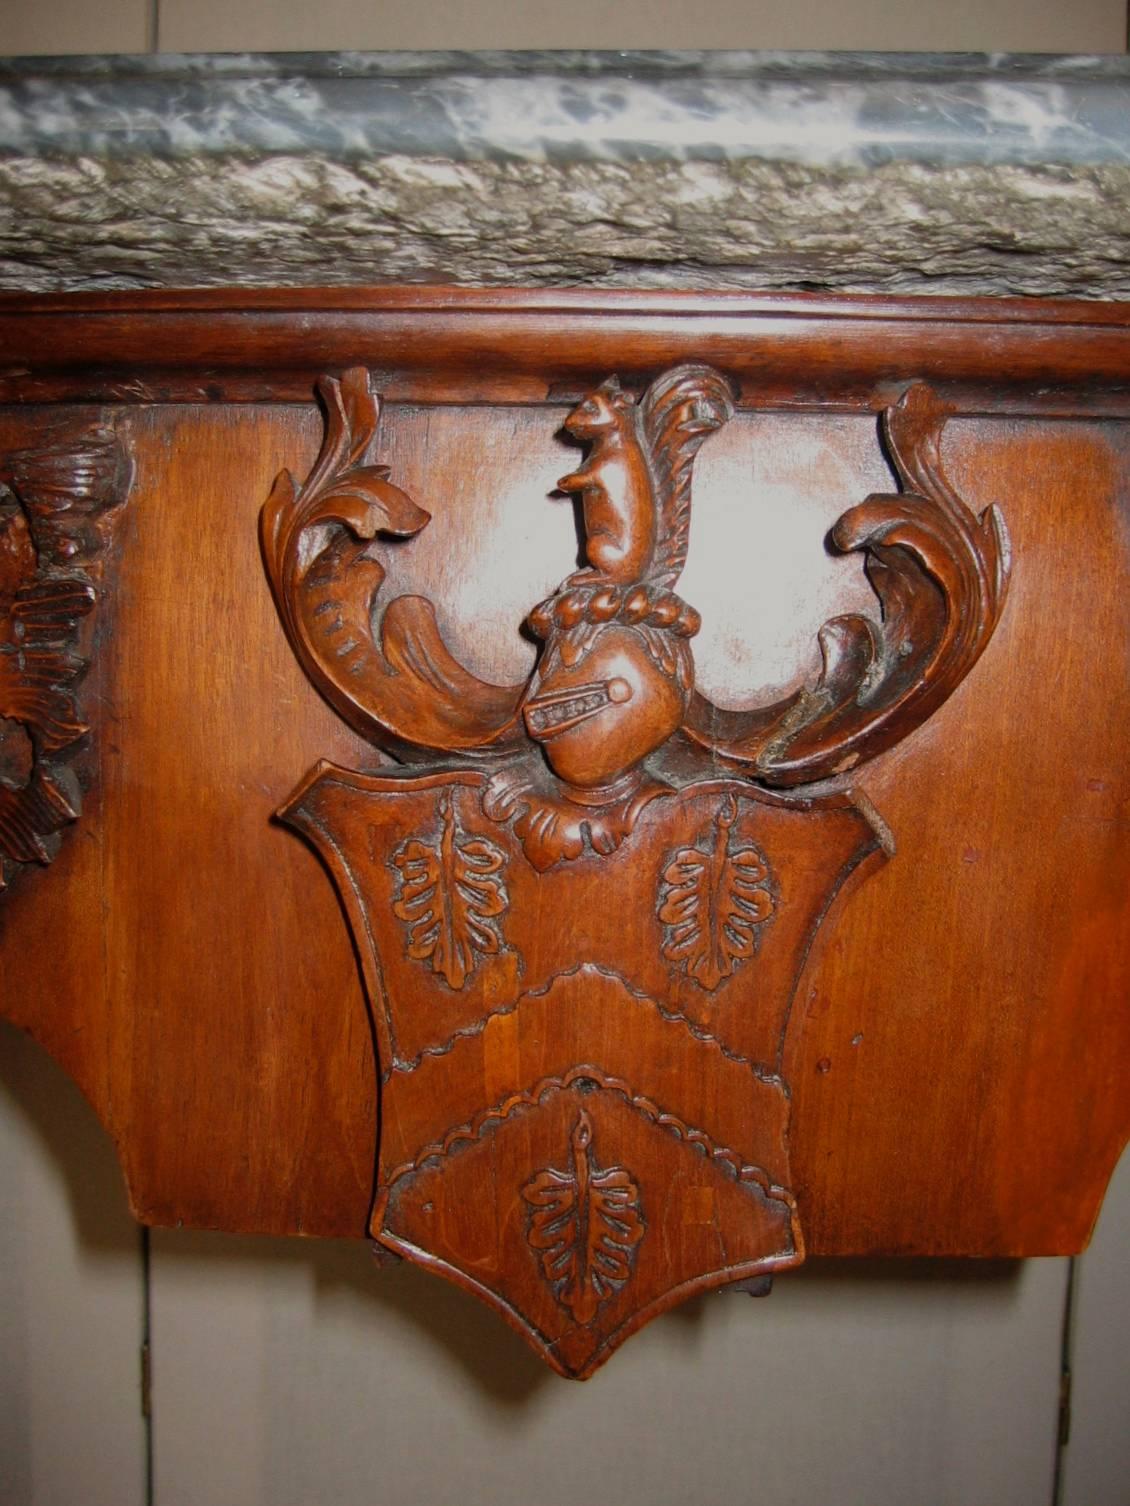 A fine quality walnut carved console table with marble top, the central panel coat of arms with inverted band and a helmet surmounted by a squirrel. The squirrel theme is repeated on the carved knees together with acorns. The table possibly either